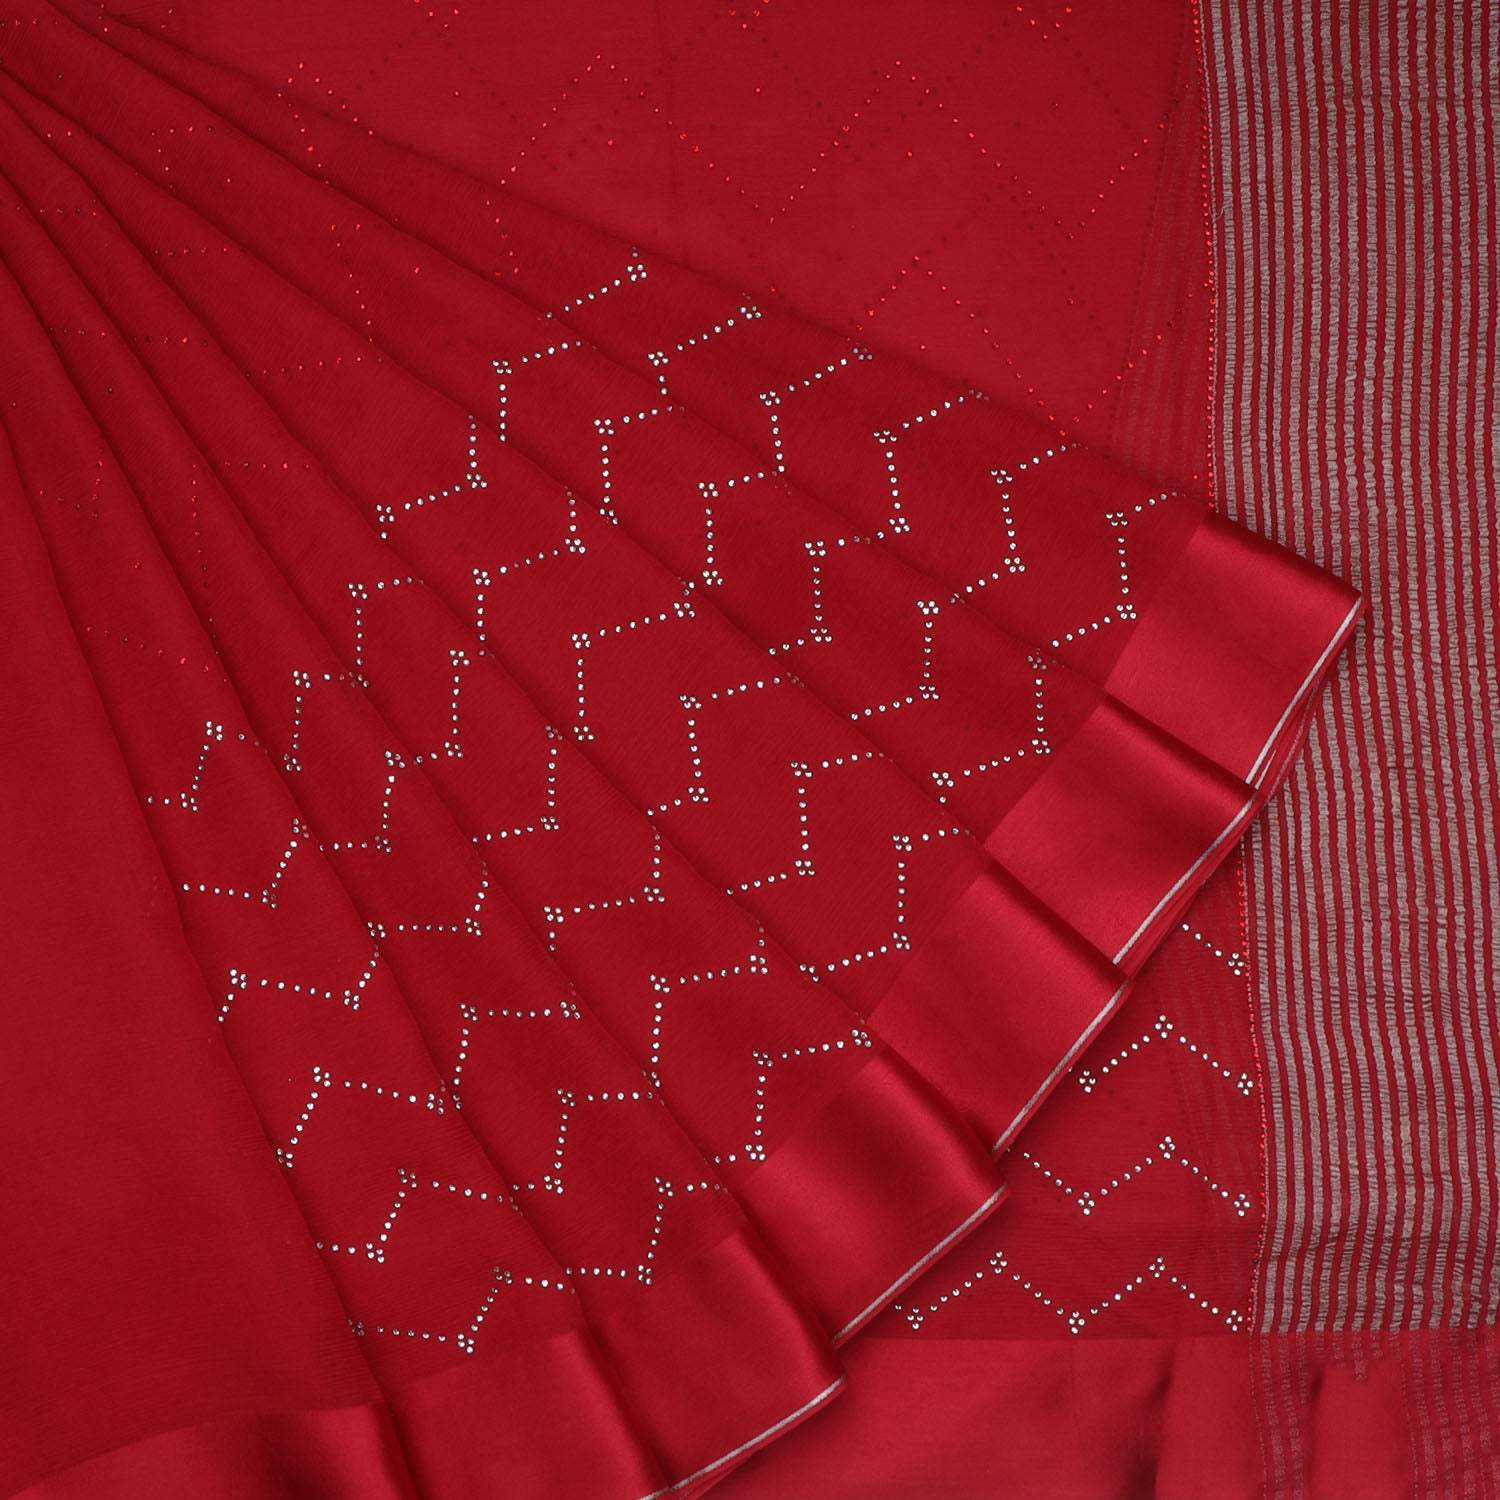 Blood Red Chiffon Saree With Embroidered Stone Work - Singhania's